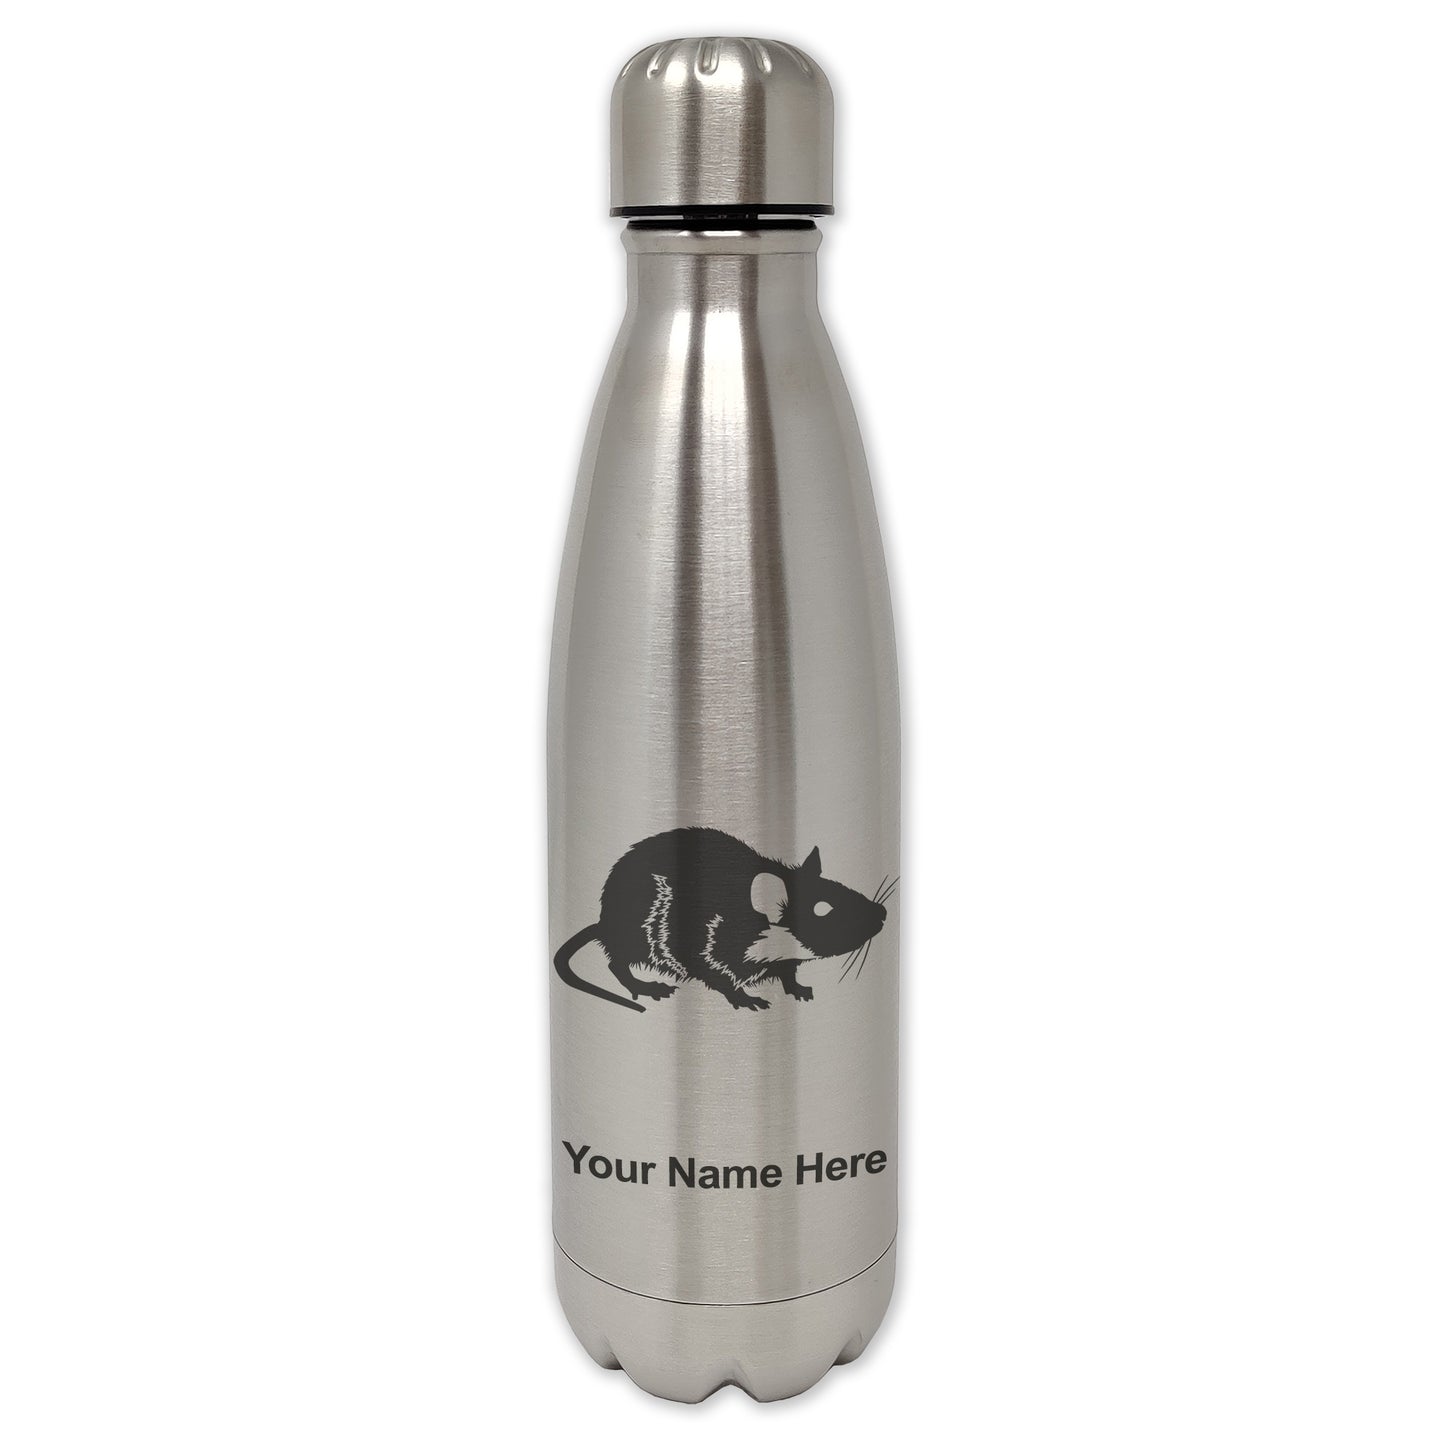 LaserGram Double Wall Water Bottle, Rat, Personalized Engraving Included